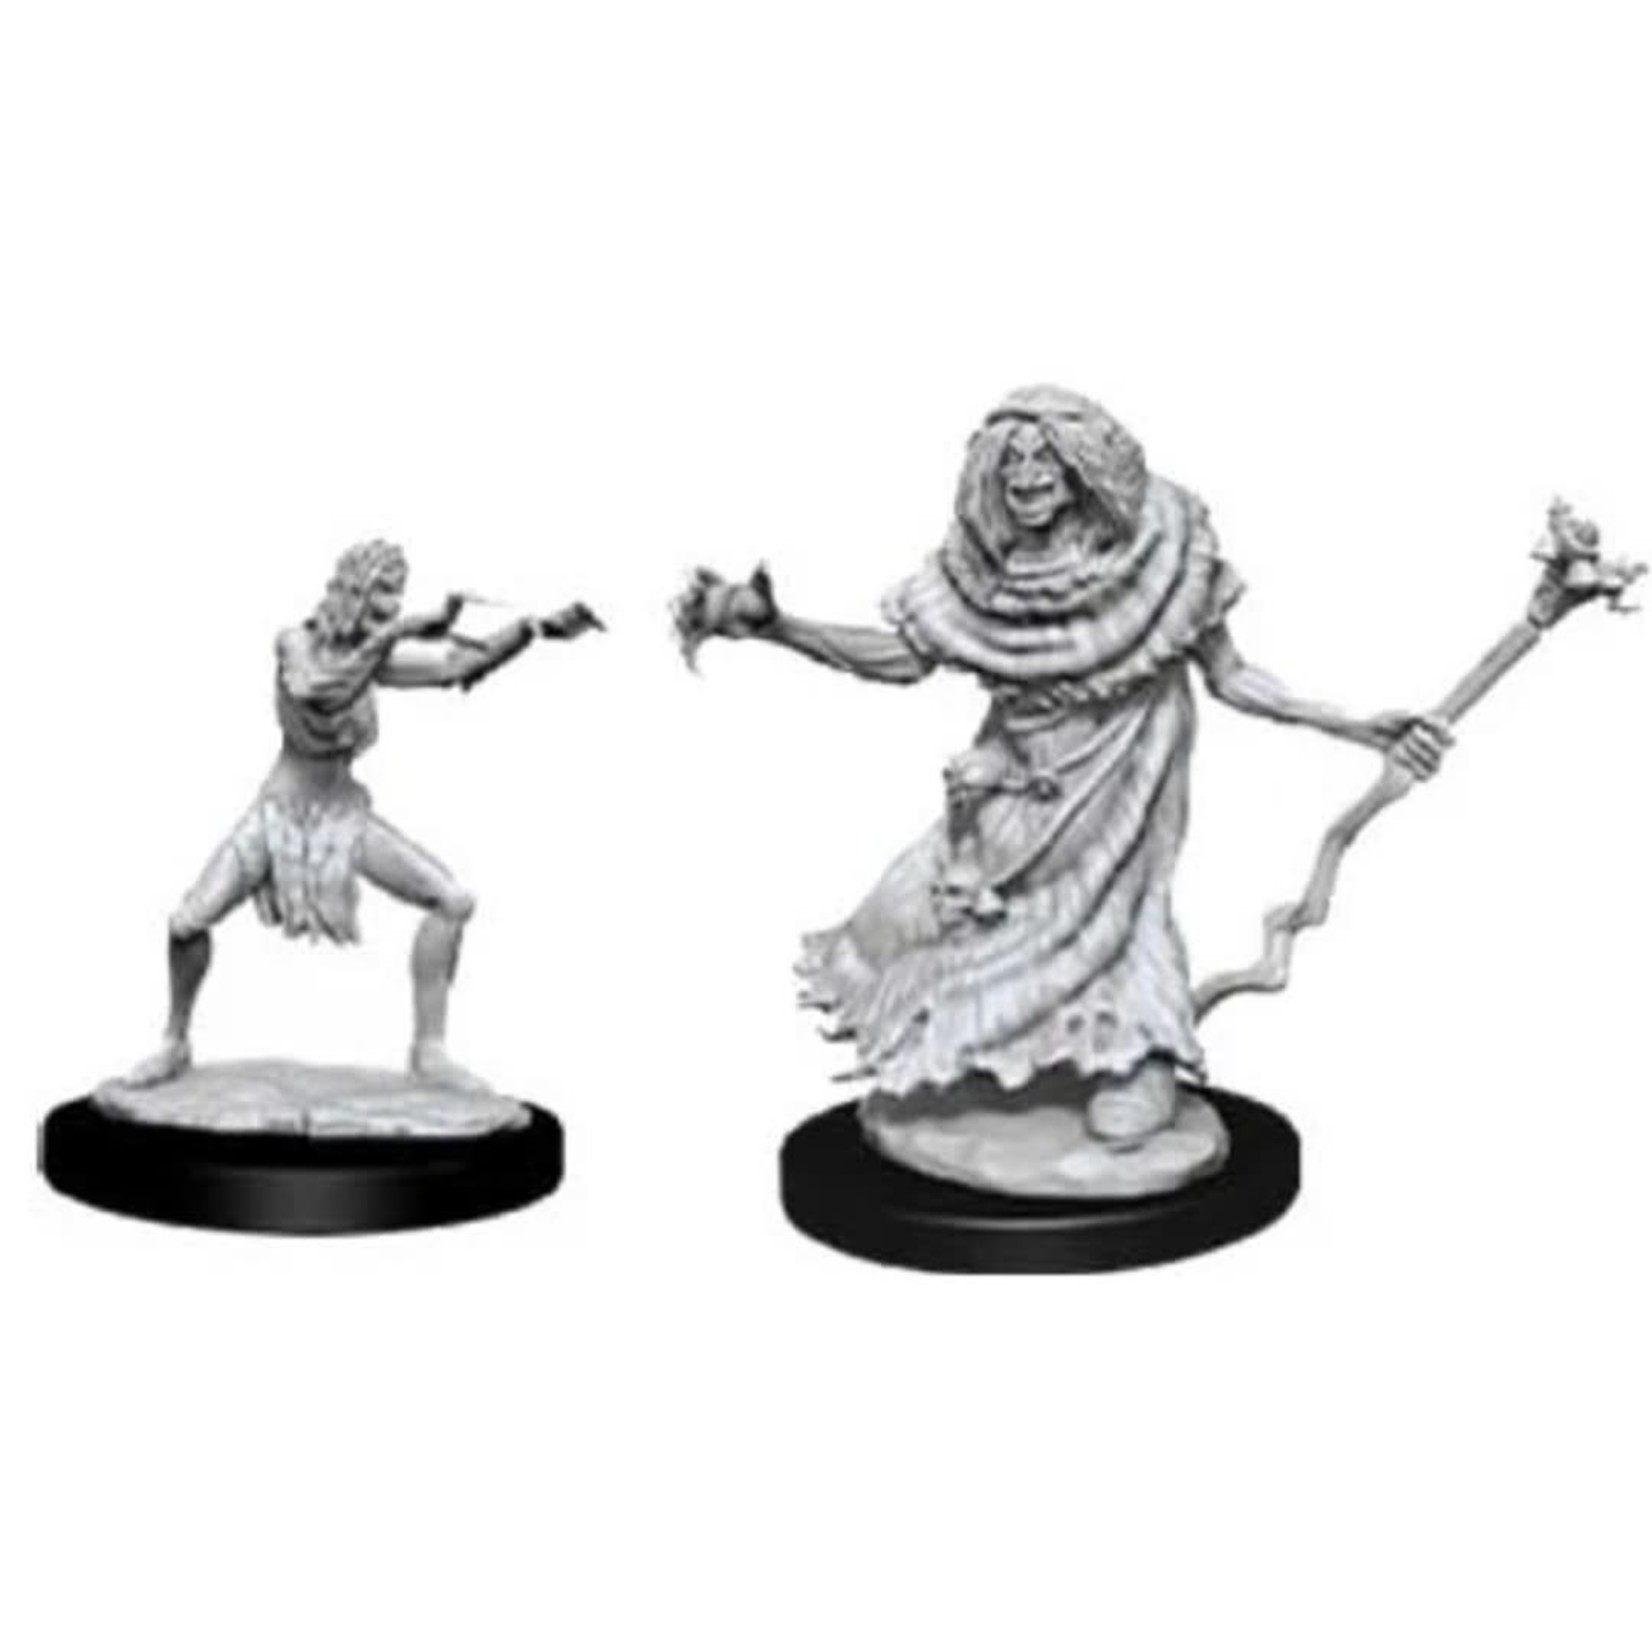 WizKids Dungeons and Dragons Nolzur's Marvelous Minis Sea Hag and Bheur Hag